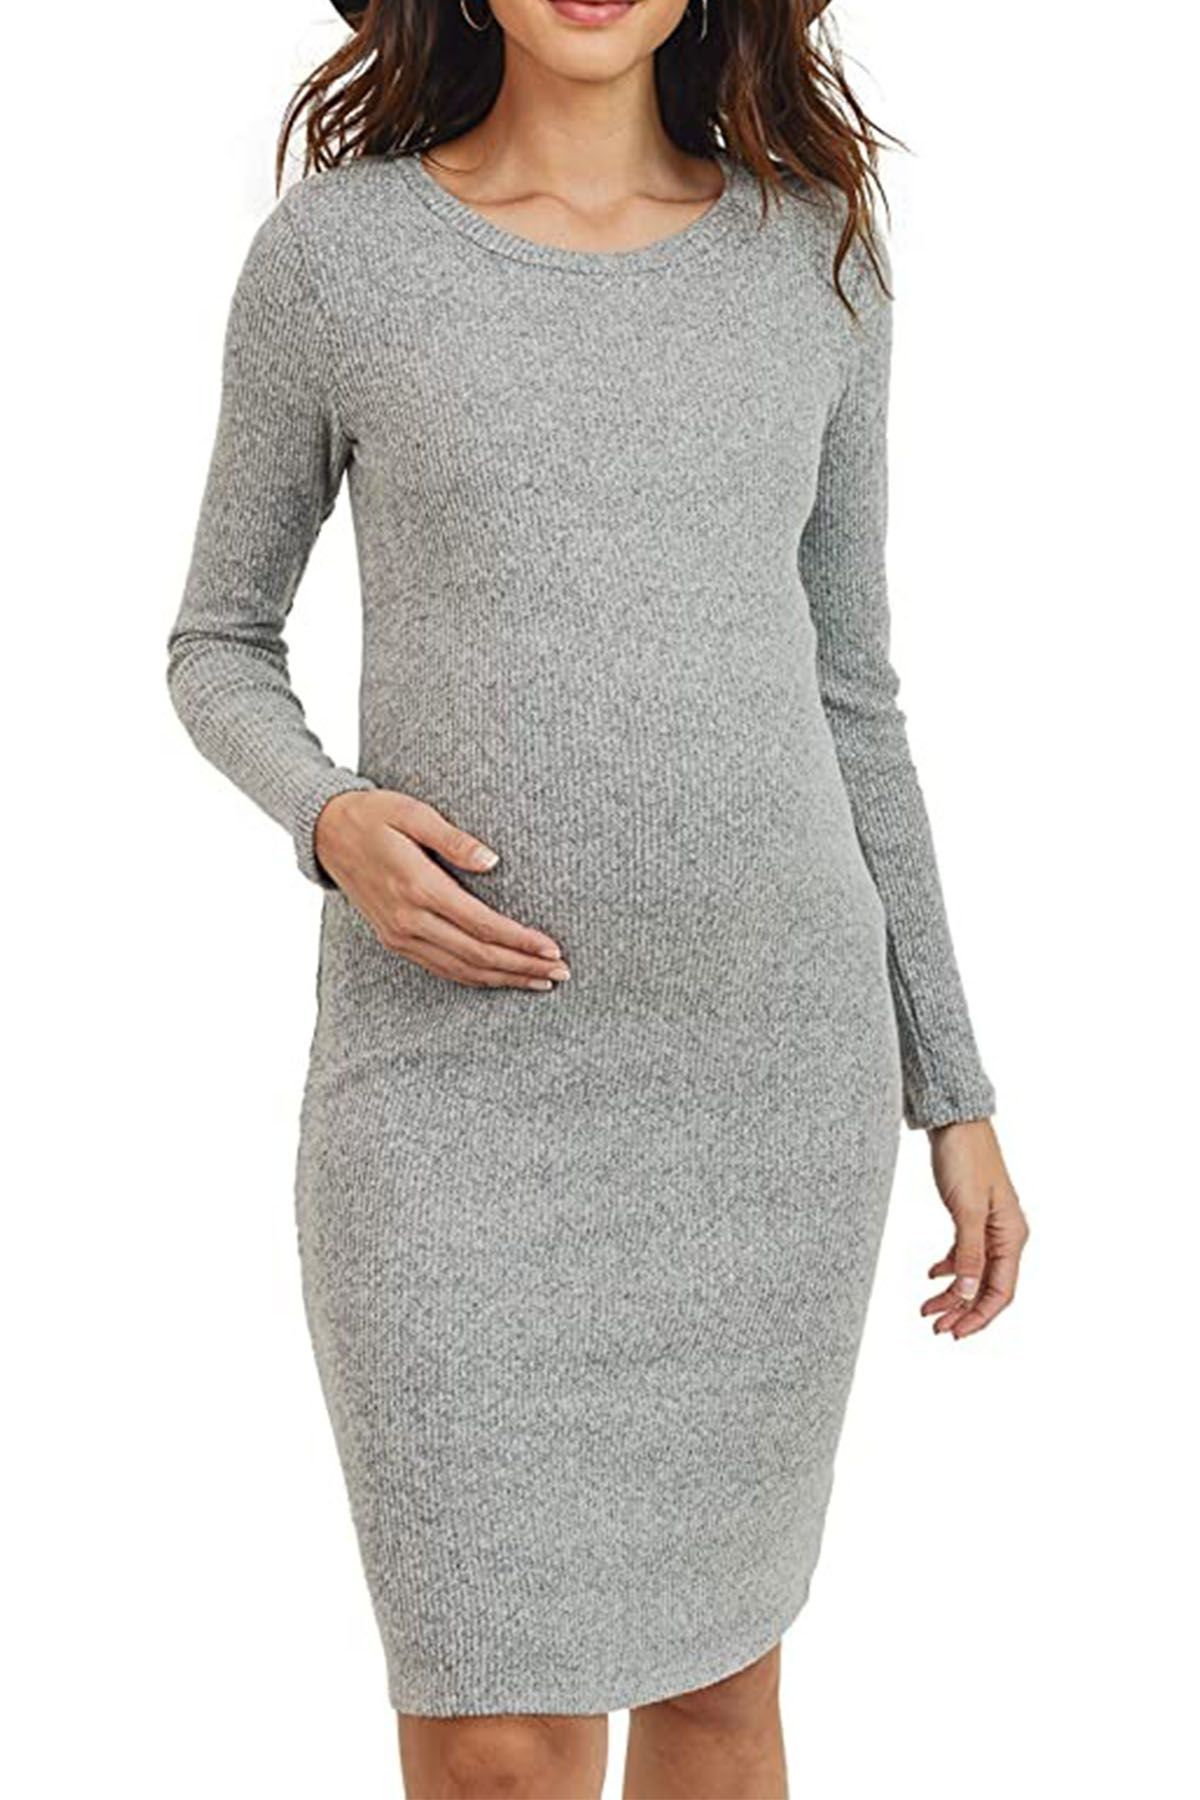 LaClef Womens Off Shoulder Sweater Knit Maternity Dress 